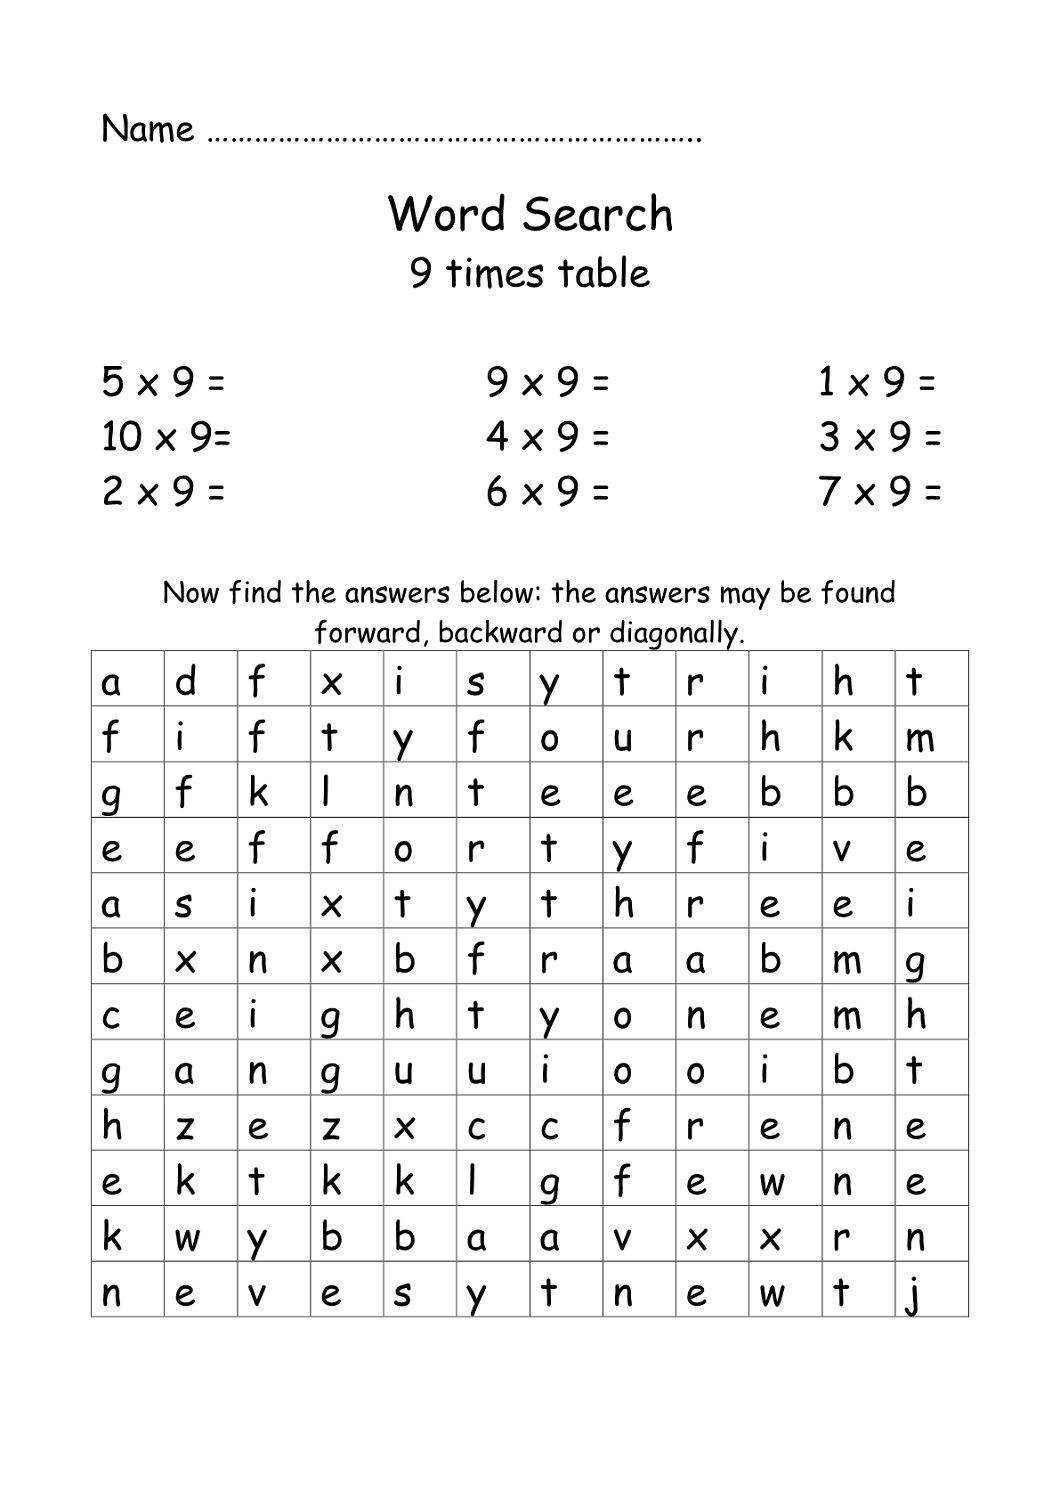 9 times table worksheets for study